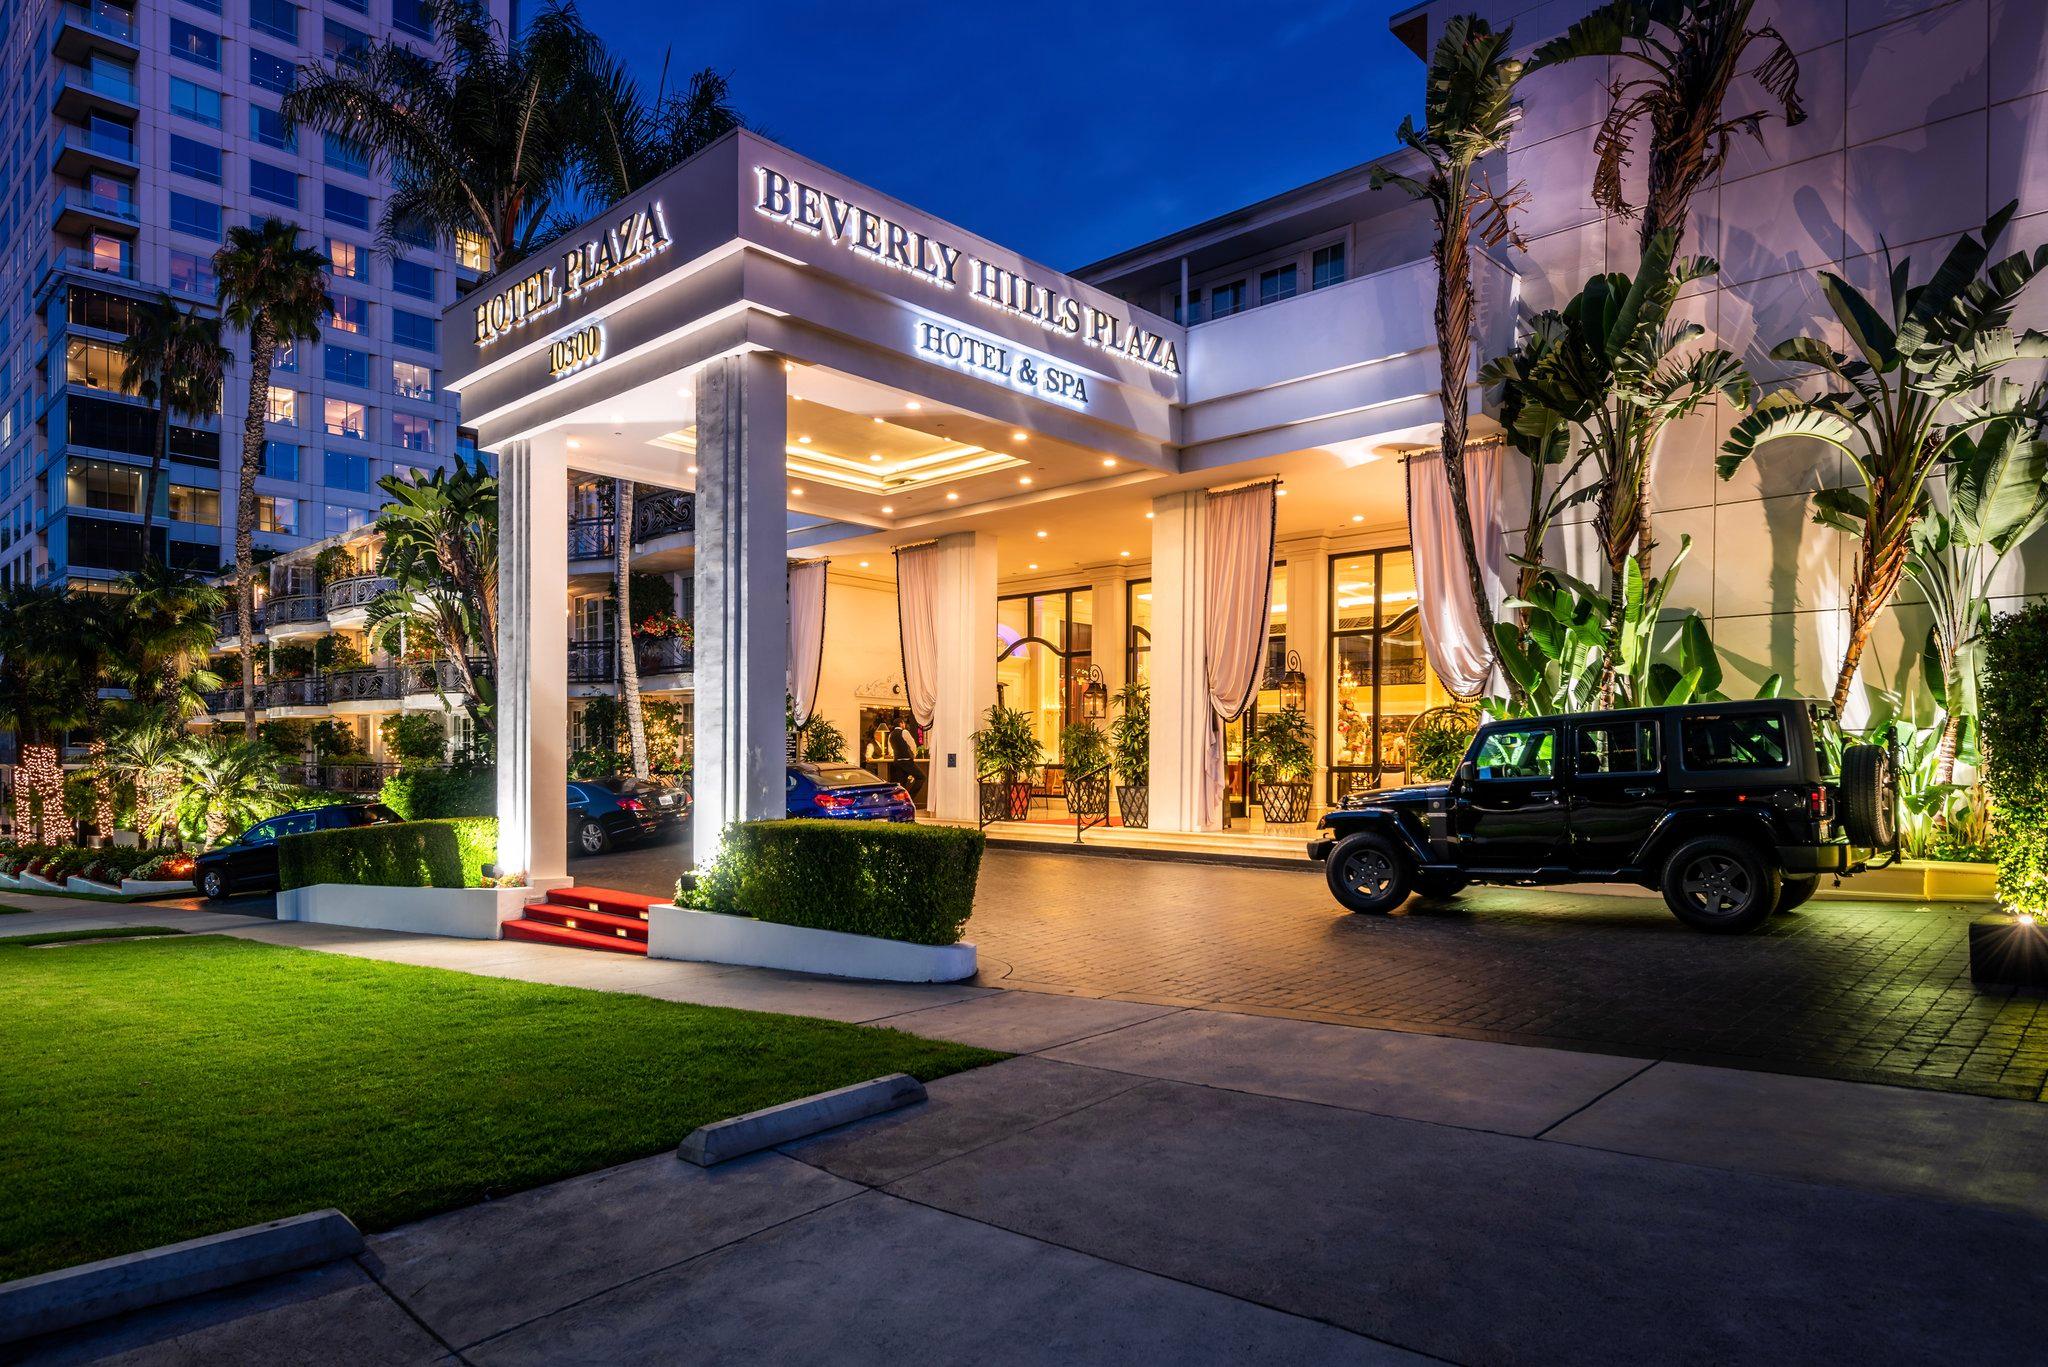 Beverly Hills Plaza Hotel & Spa in Los Angeles, CA